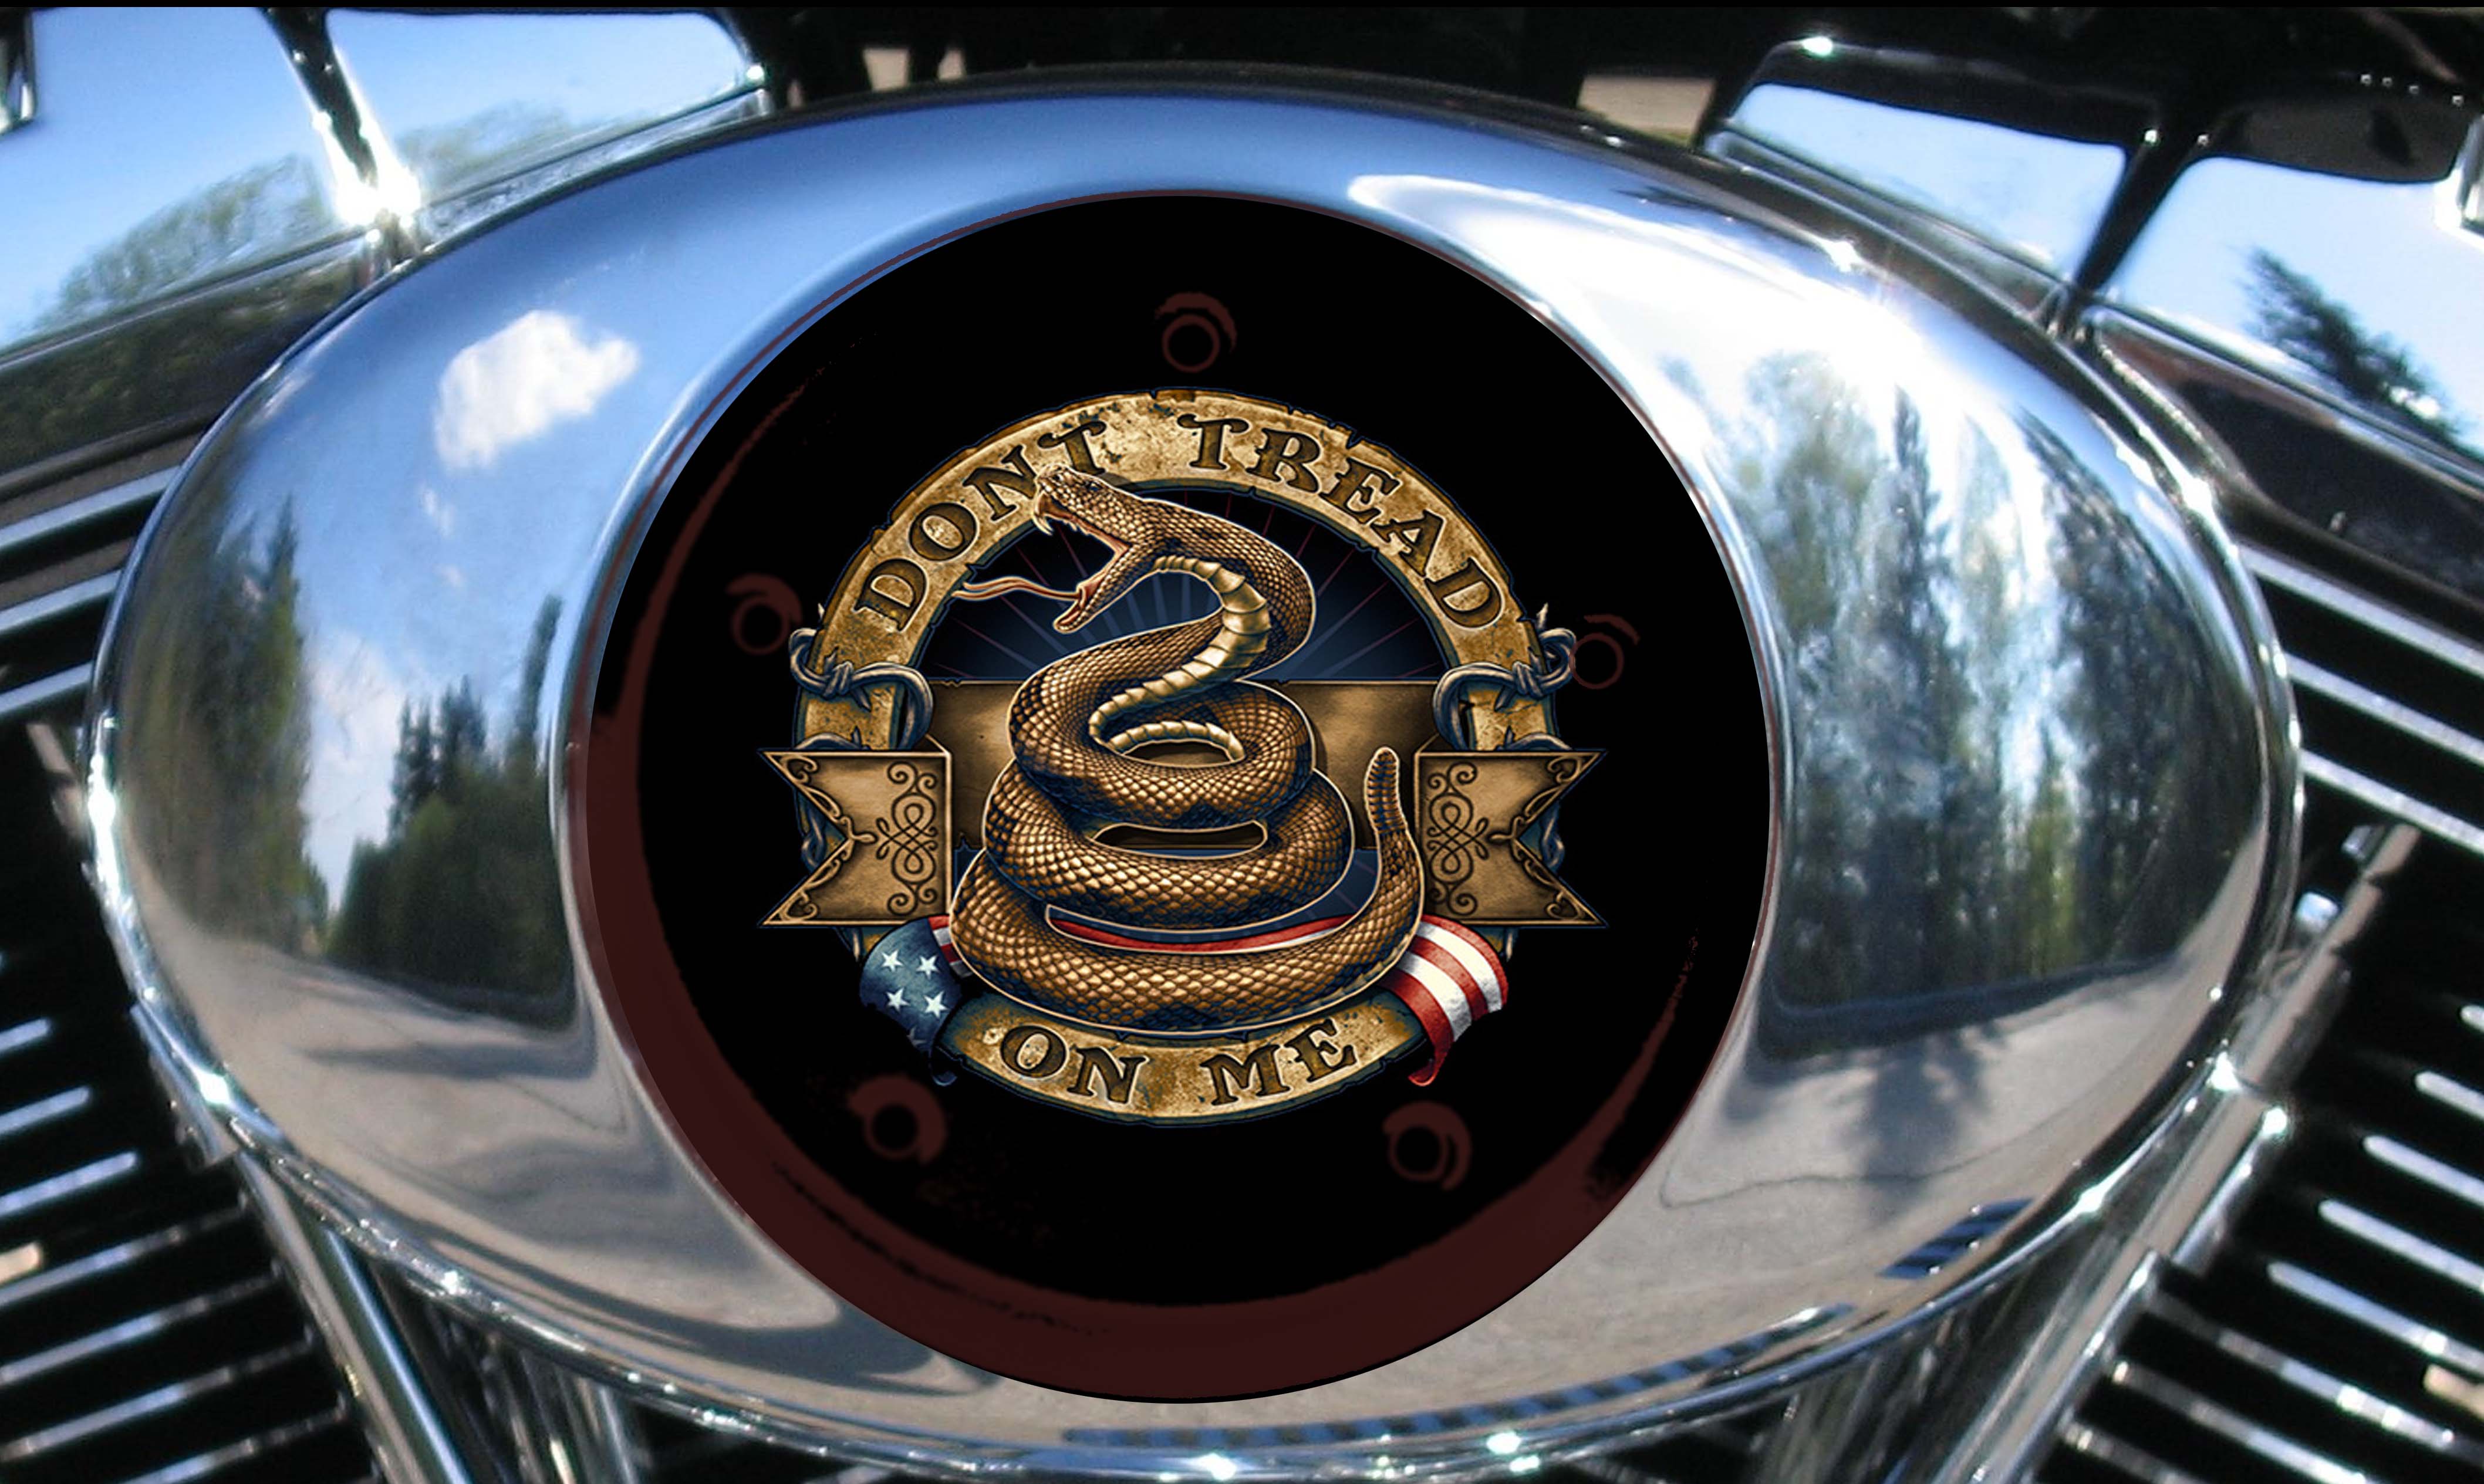 Custom Air Cleaner Cover - Don't Tread On Me